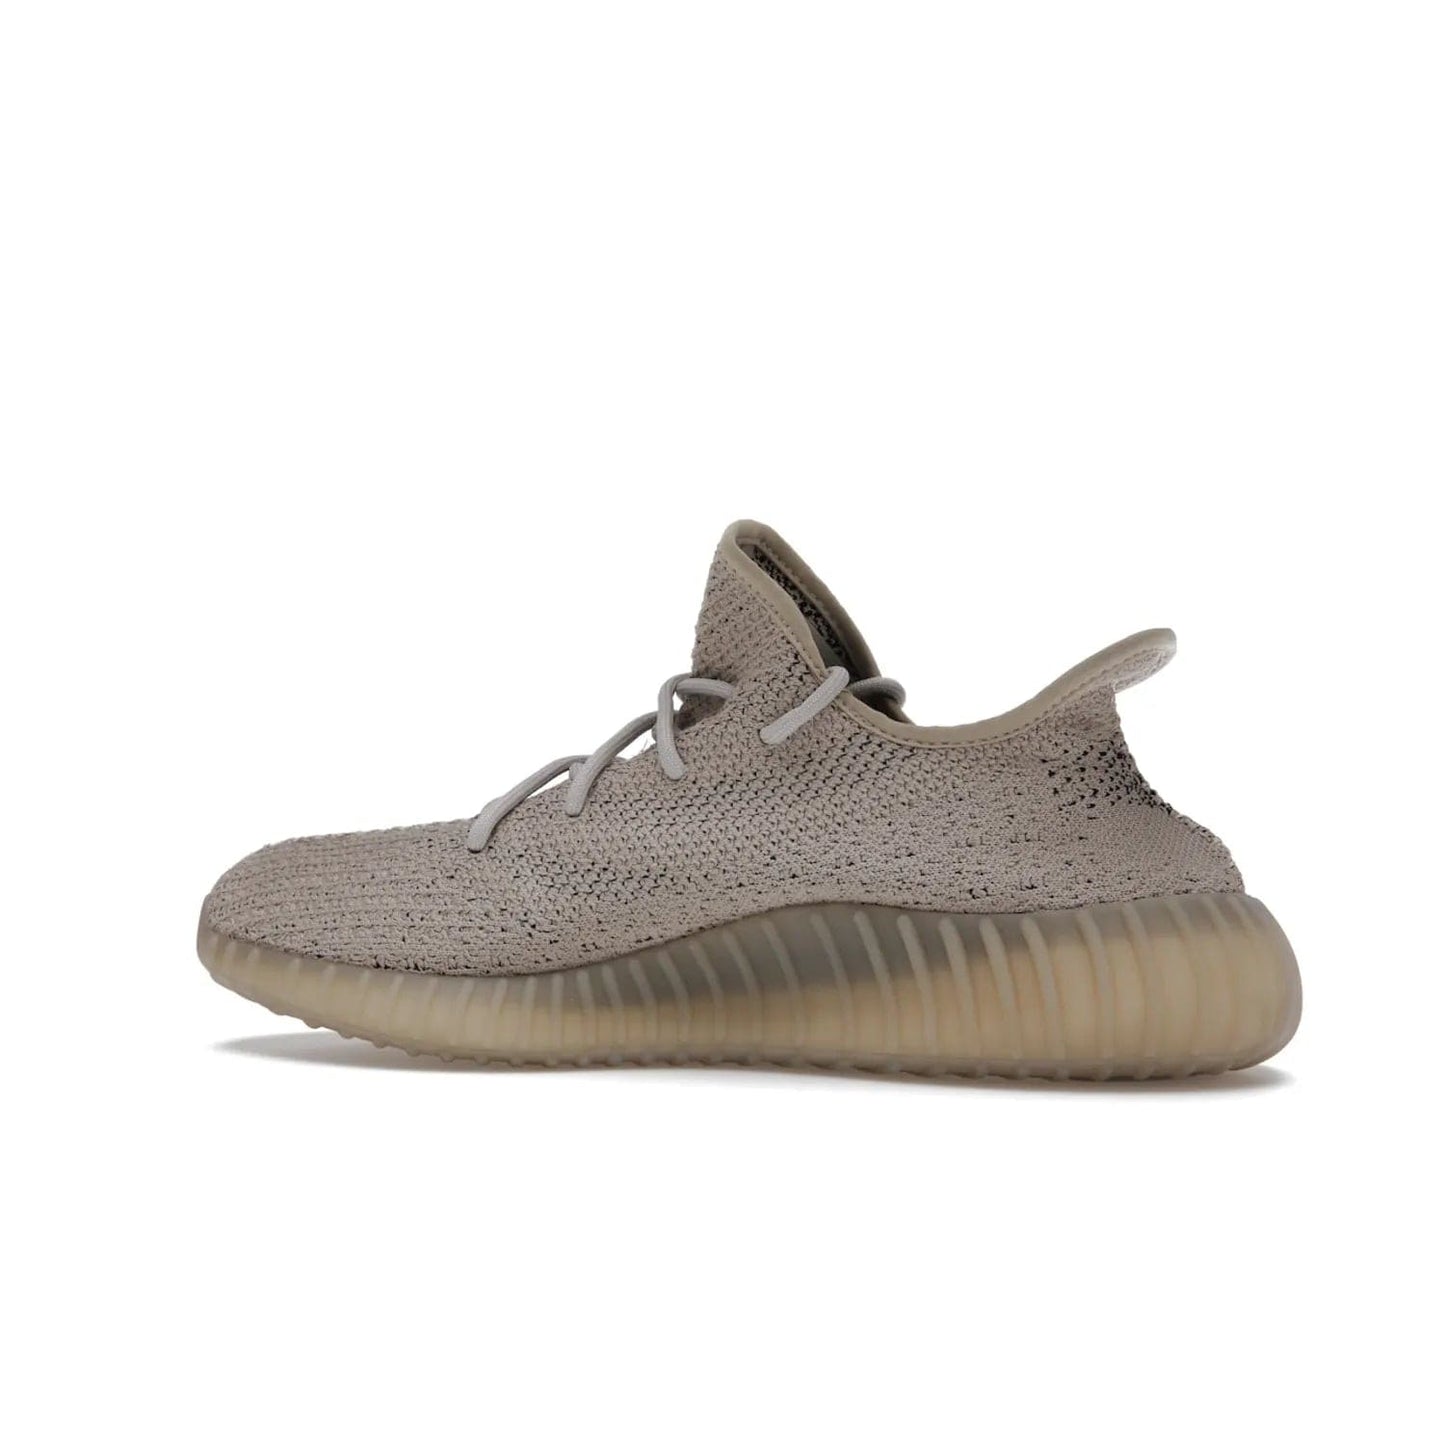 adidas Yeezy Boost 350 V2 Slate - Image 21 - Only at www.BallersClubKickz.com - Adidas Yeezy Boost 350 V2 Slate Core Black Slate featuring Primeknit upper, Boost midsole and semi-translucent TPU cage. Launched on 3/9/2022, retailed at $230.